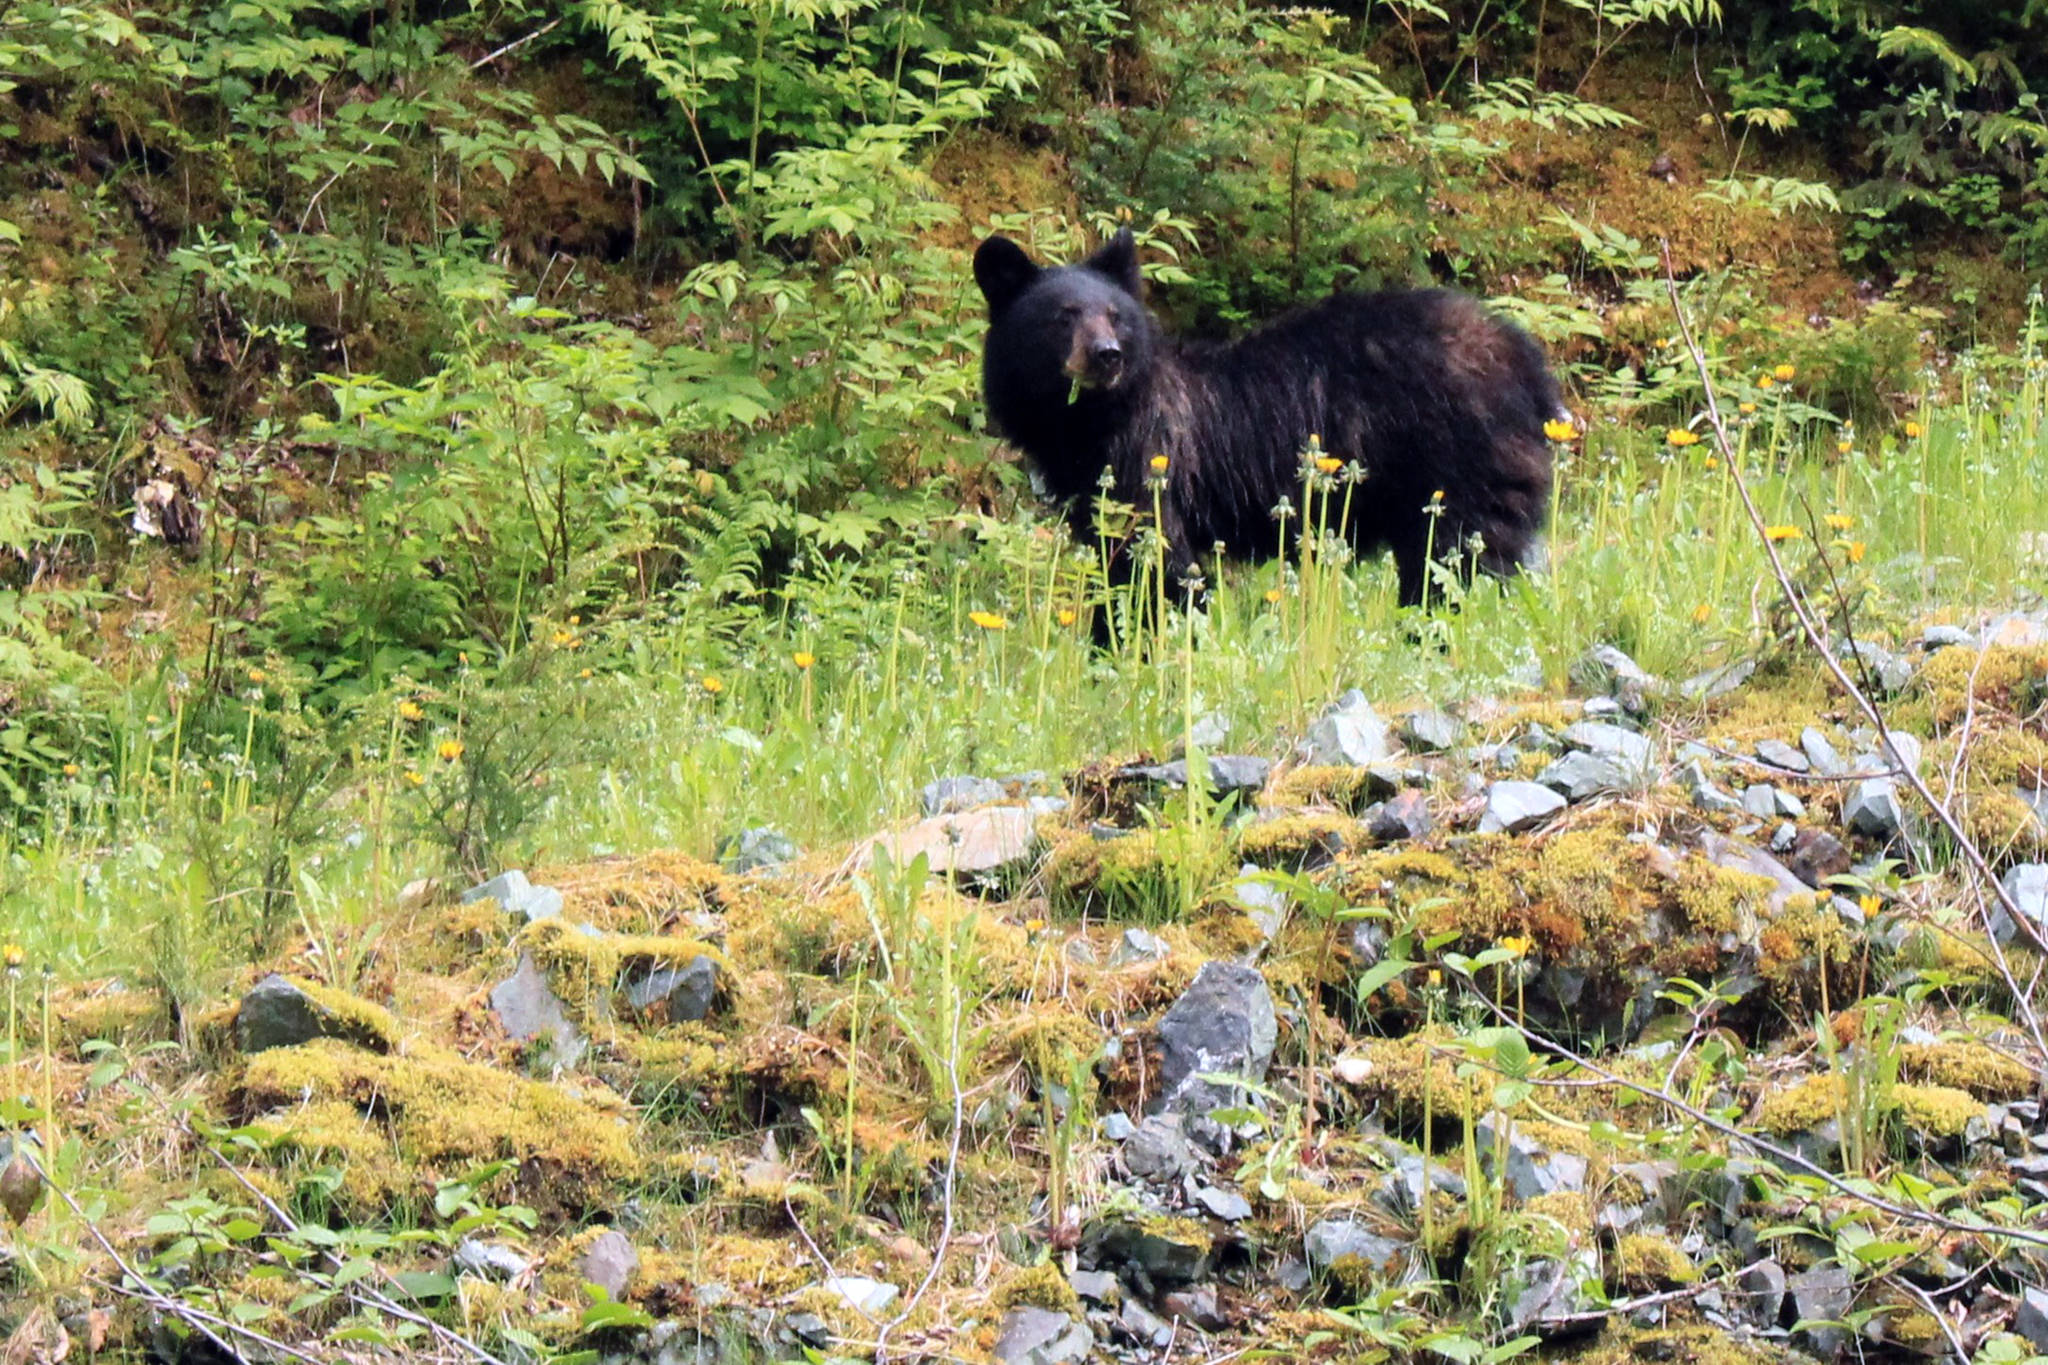 Encounters with bears like this one near the Shrine of St. Therese are on track for a normal year right now, but the berry and salmon seasons are too early to call right now, say biologists. (Dana Zigmund / Juneau Empire)